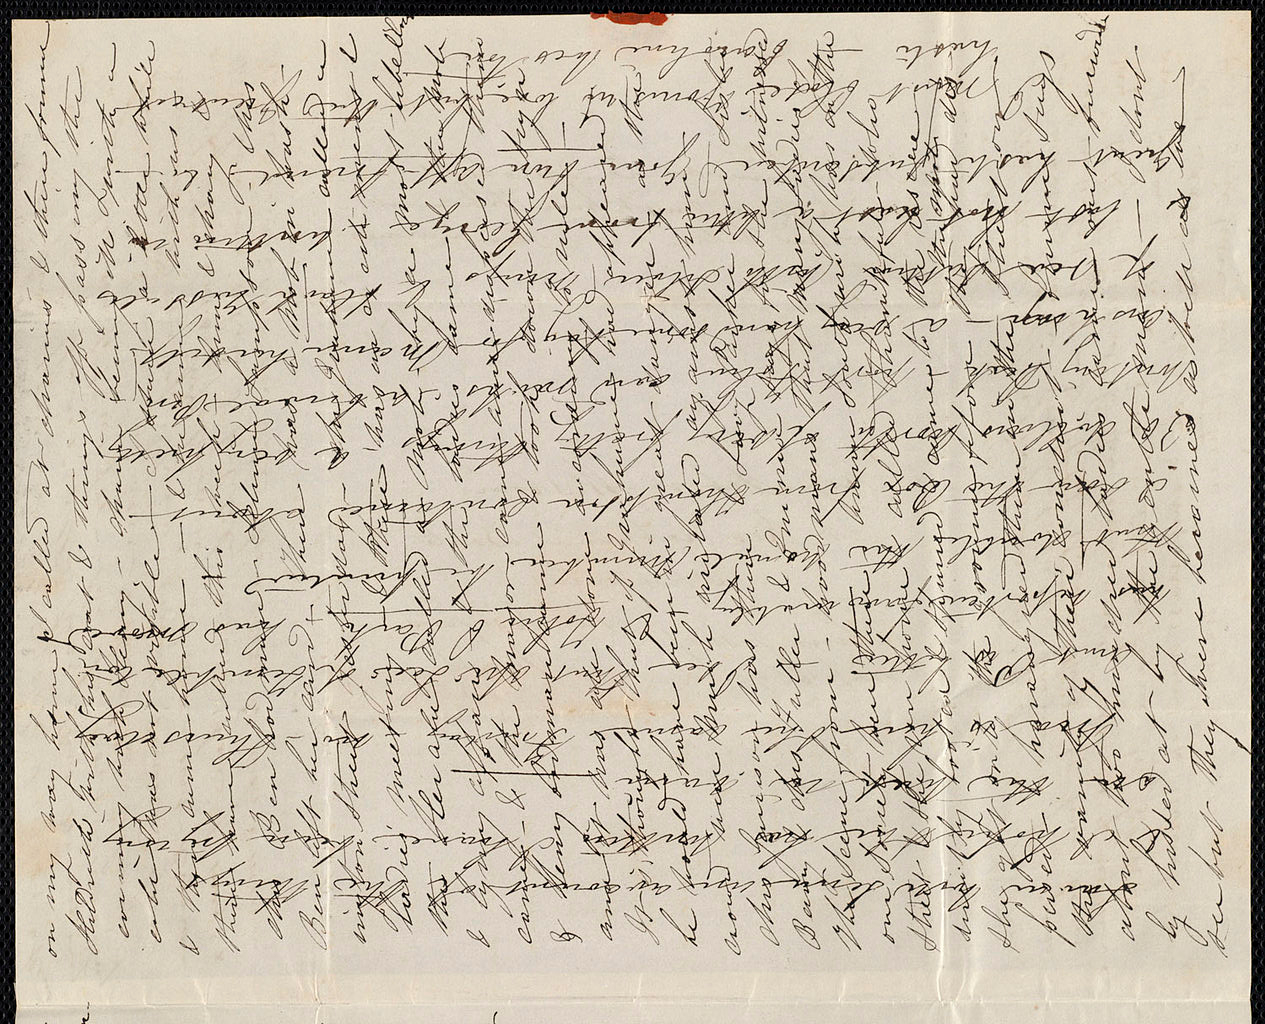 Example of a cross written letter to save paper and postage, much as the Austens sent to each other. The recipient of the letter paid for the postage. Paper was saved by cross writing. Image in the public domain.